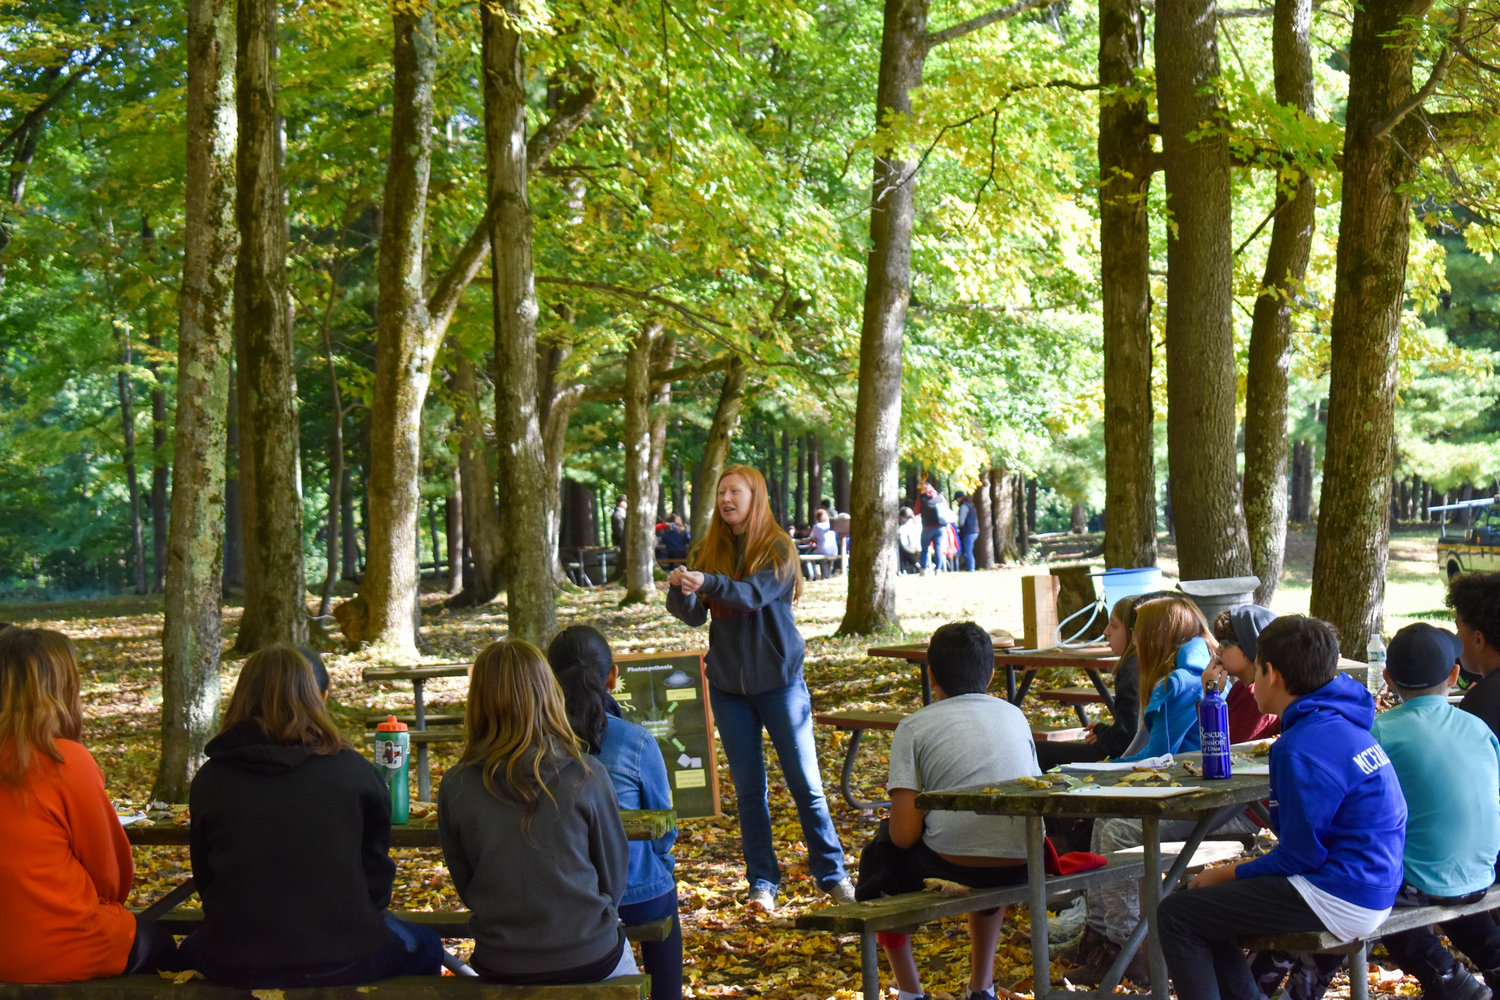 Colleen McEwen, an “Ag in the Classroom” educator from Cornell Cooperative Extension of Oneida County, shows students a tap for collecting sap from maple trees at the recent Conservation Education Days at Delta Lake State Park in Rome.